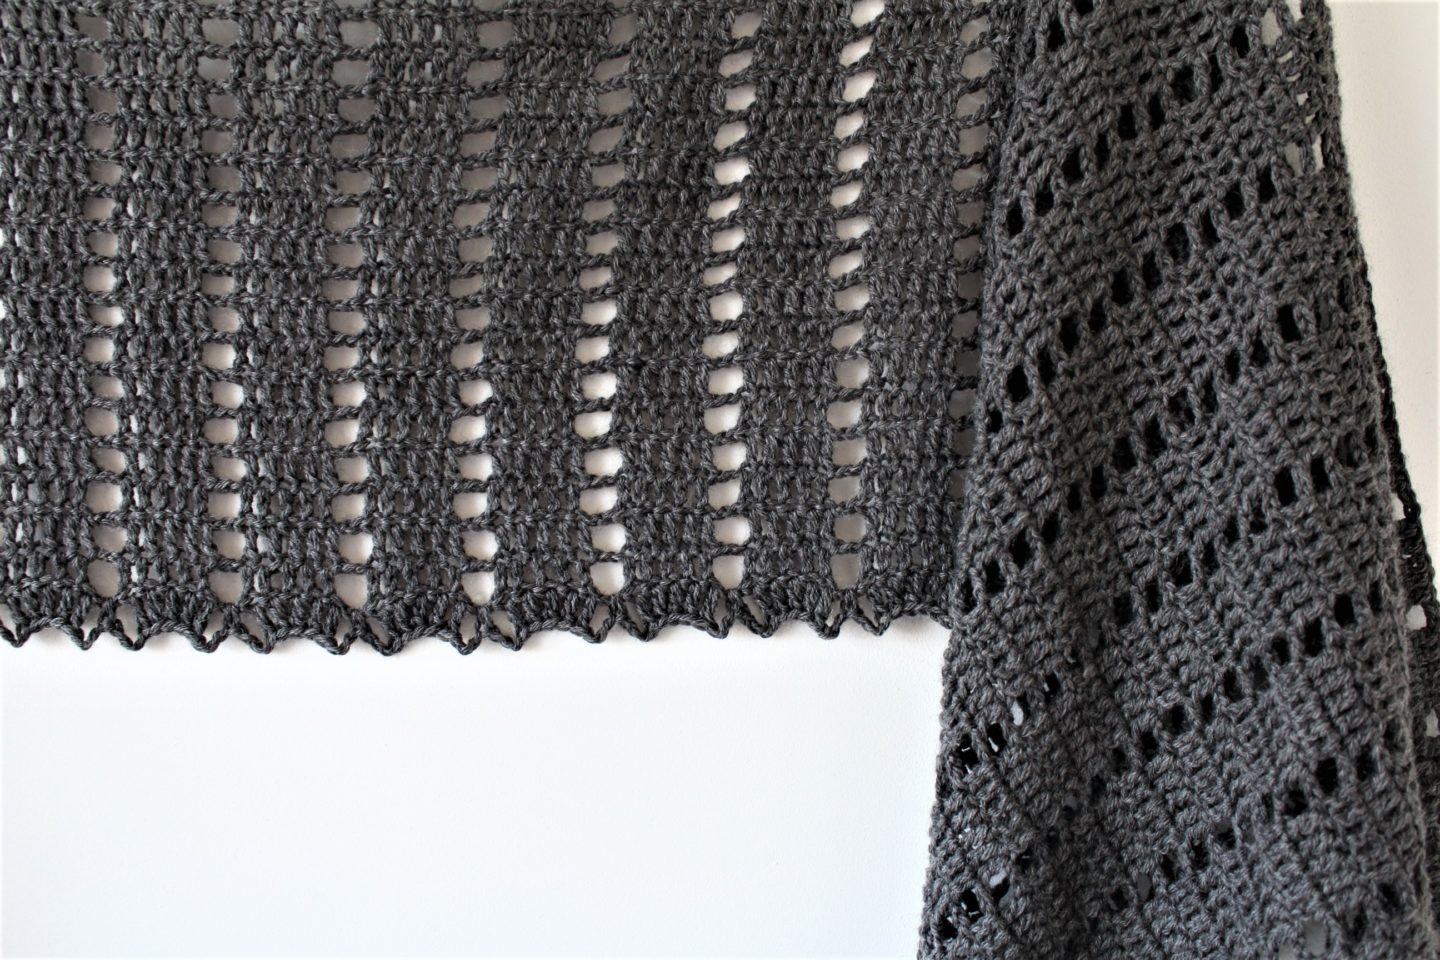 Close up of the free crochet shawl